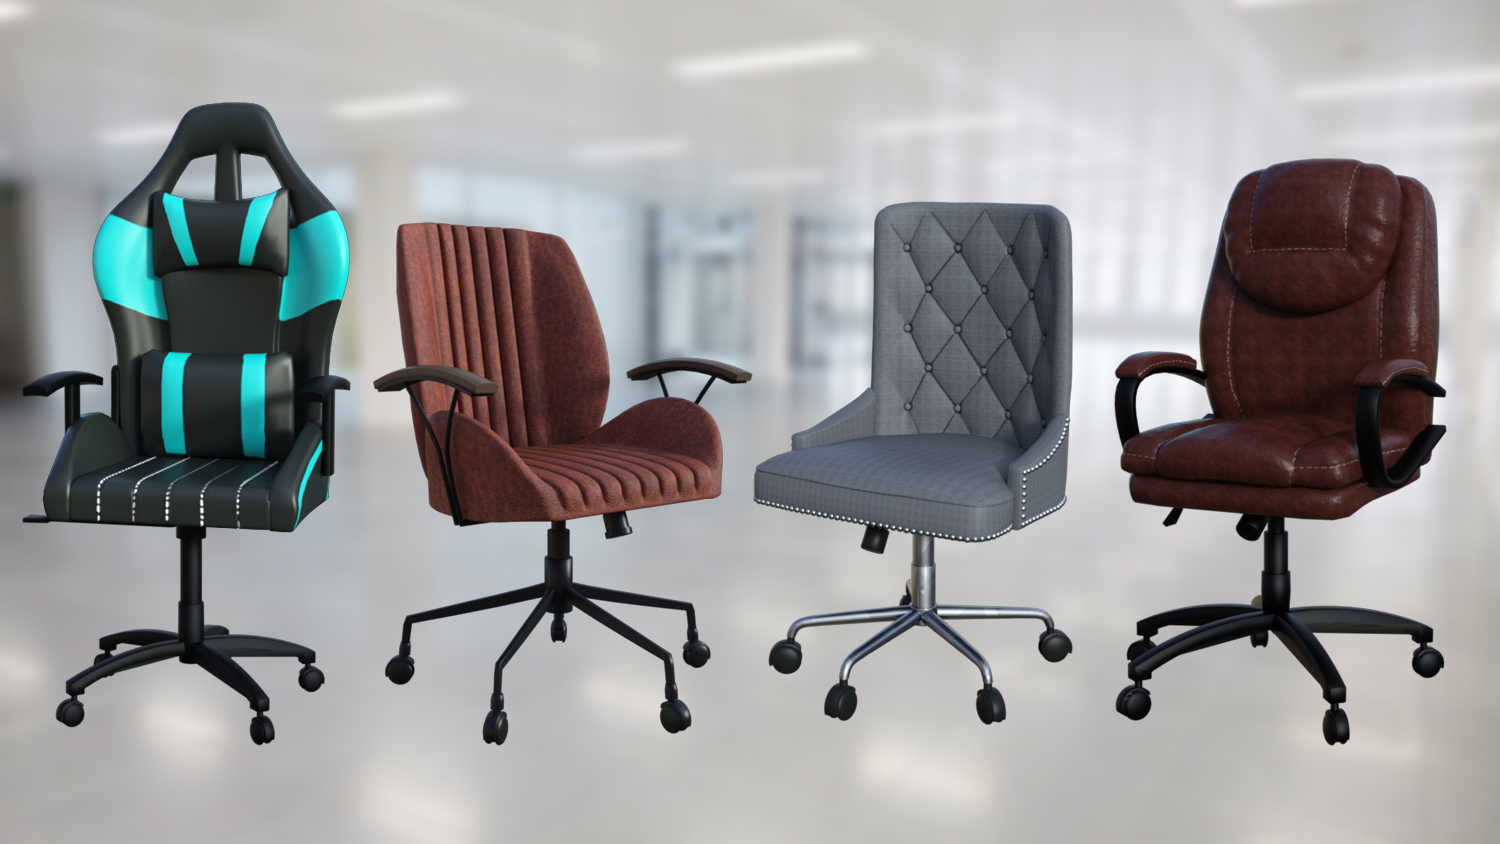 Generations Of Chairs by: PerspectX, 3D Models by Daz 3D